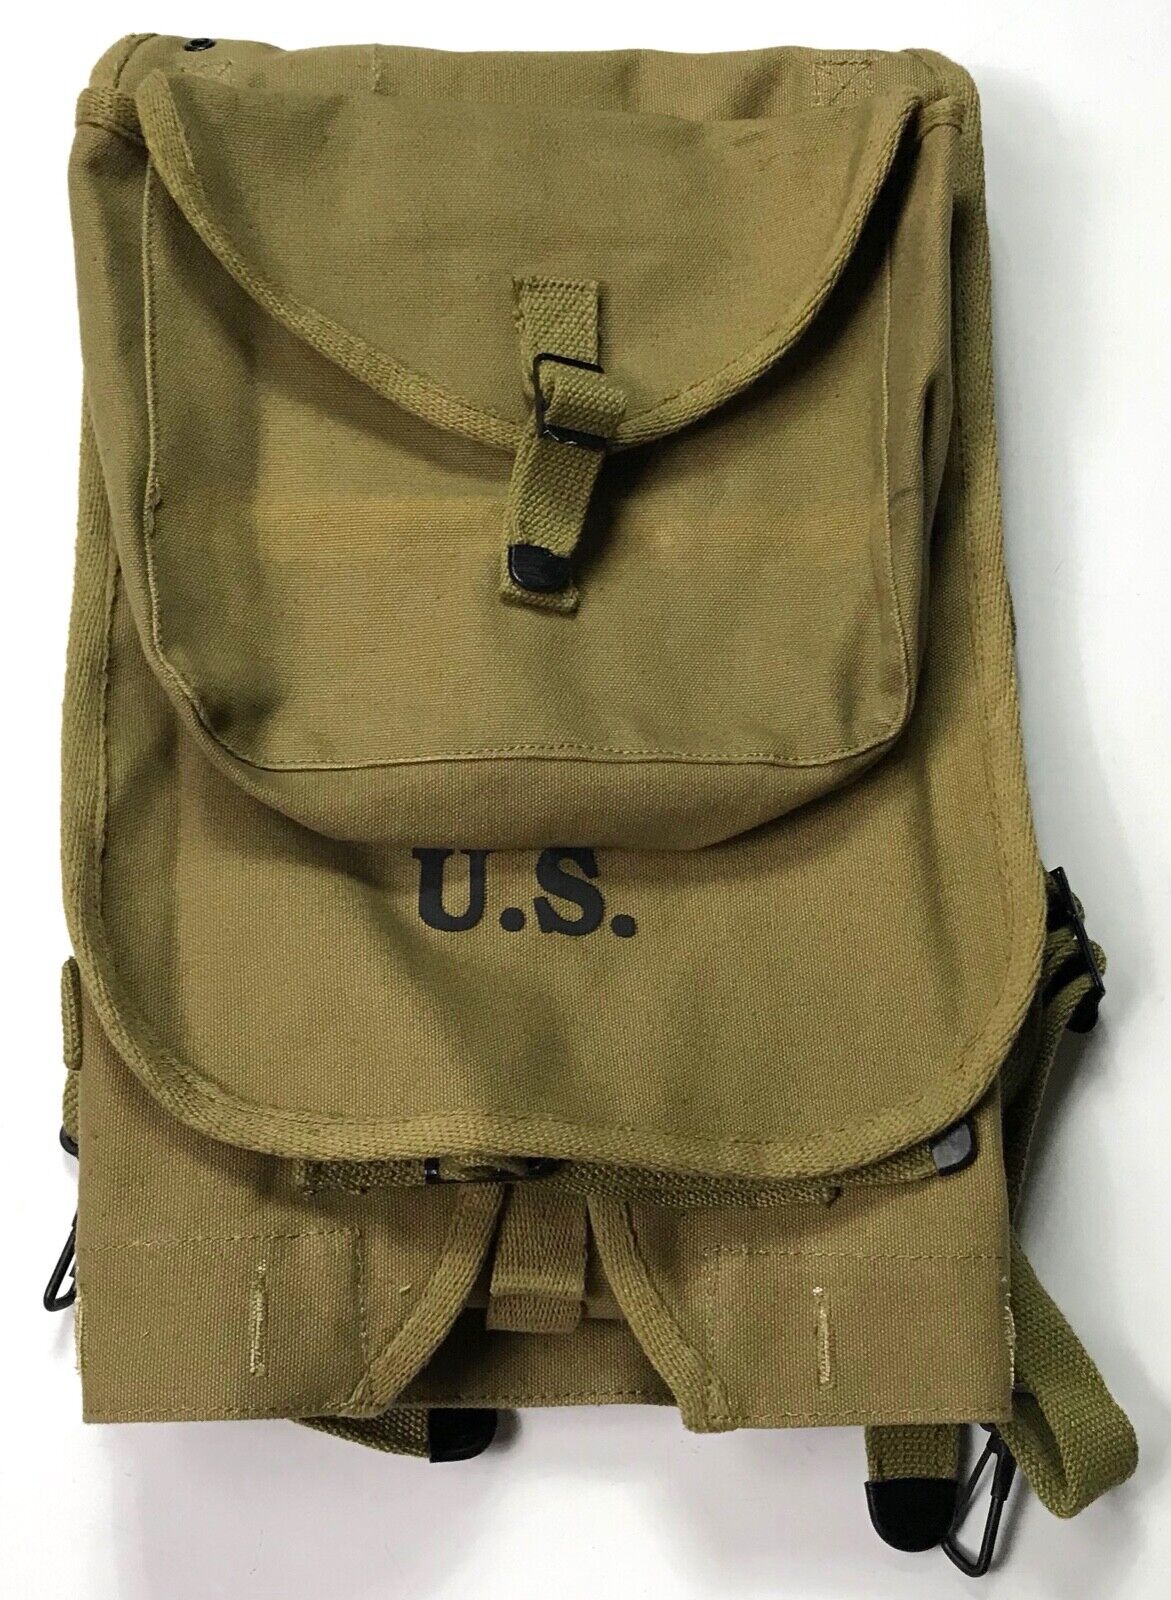 WWII US ARMY M1928 HAVERSACK COMBAT FIELD PACK-OD#3